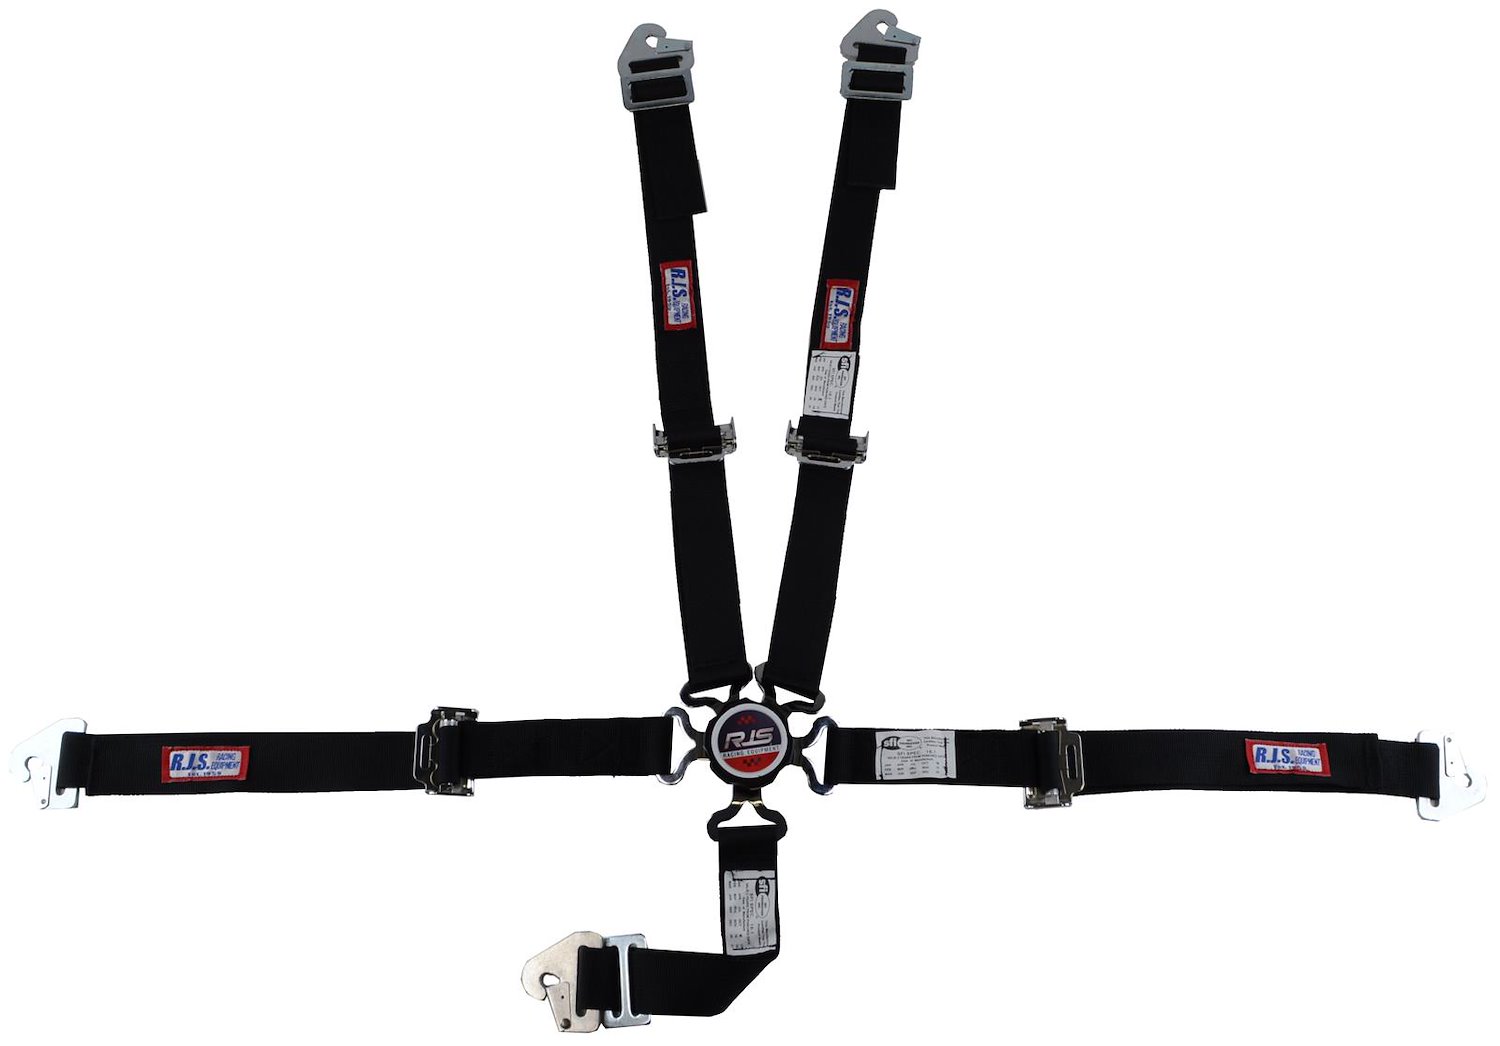 SFI 16.1 CAM-LOCK HARNESS 2 PULL UP Lap Belt 2 Shoulder Harness Individual FLOOR Mount 2 SINGLE Sub ALL WRAP/BOLT ENDS GRAY